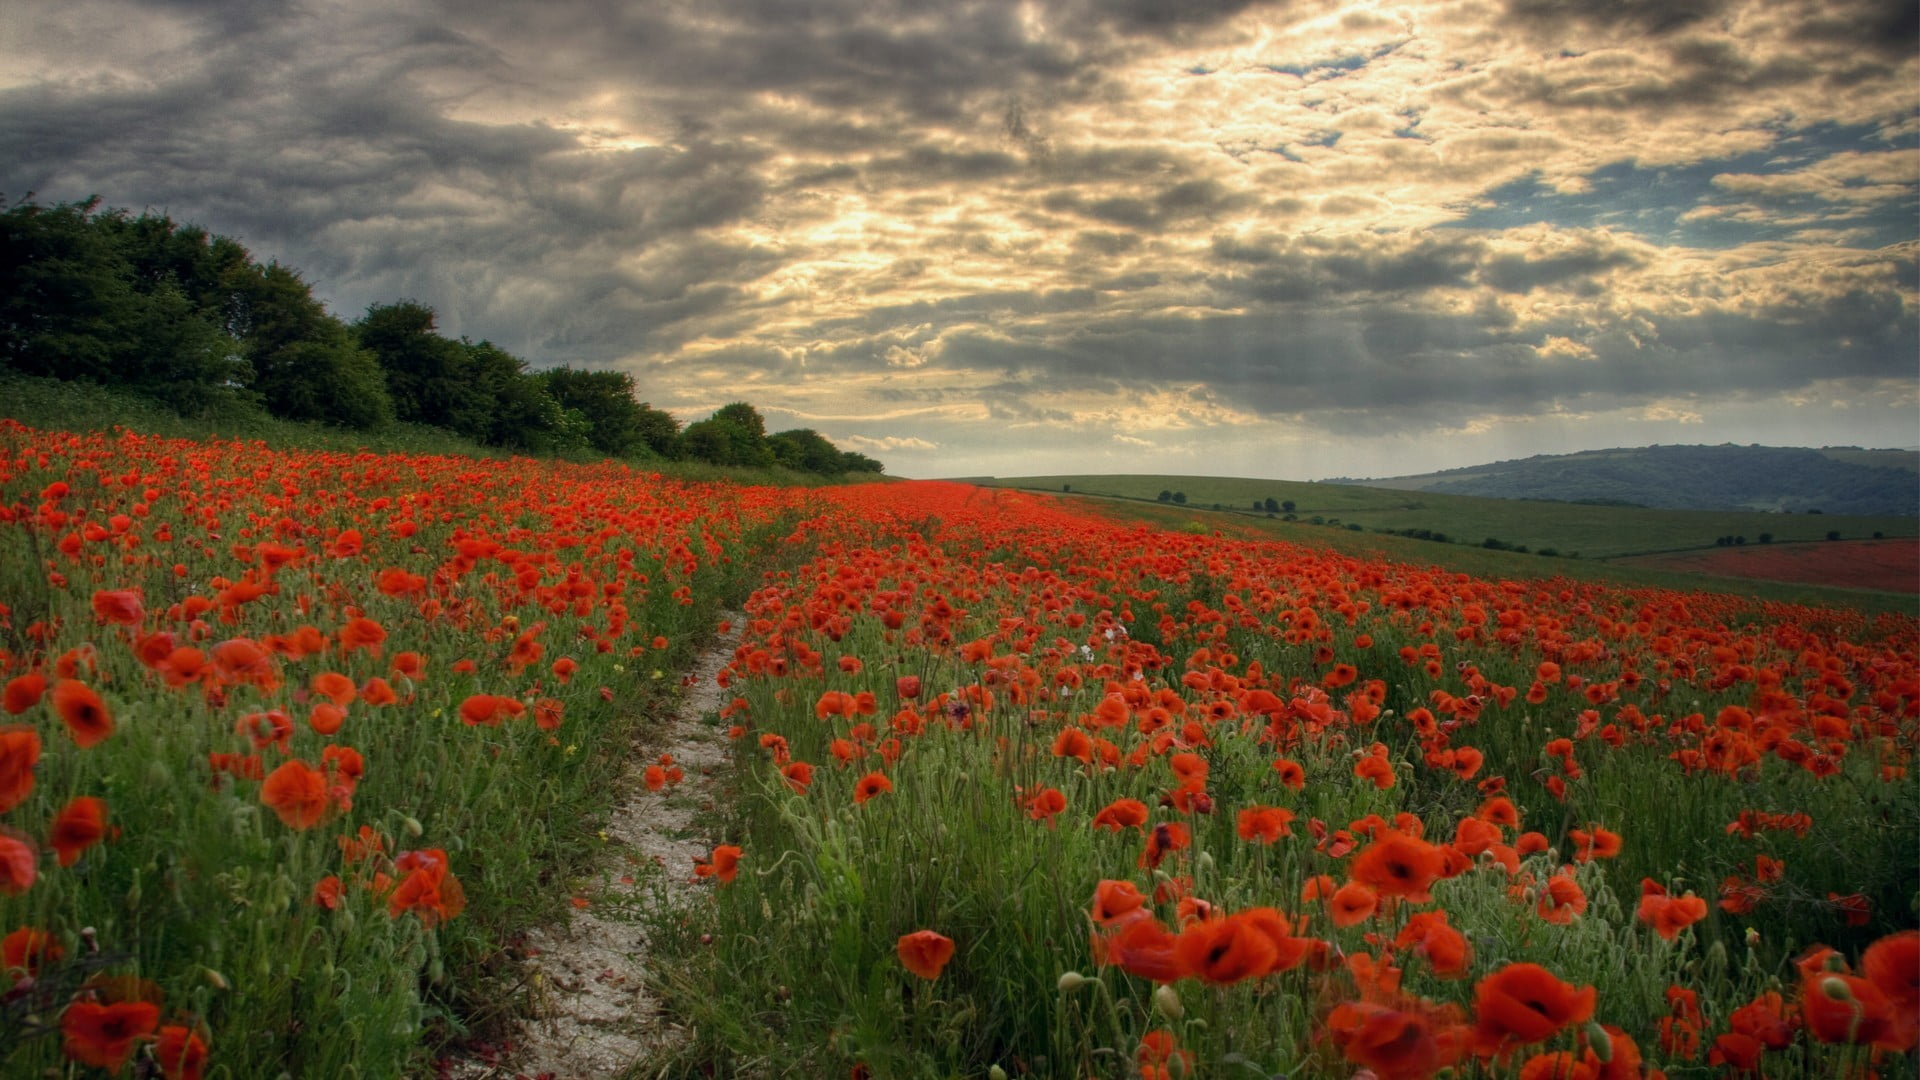 Stunning Poppy Field Landscape At Sunset On South Downs #3, 55% OFF